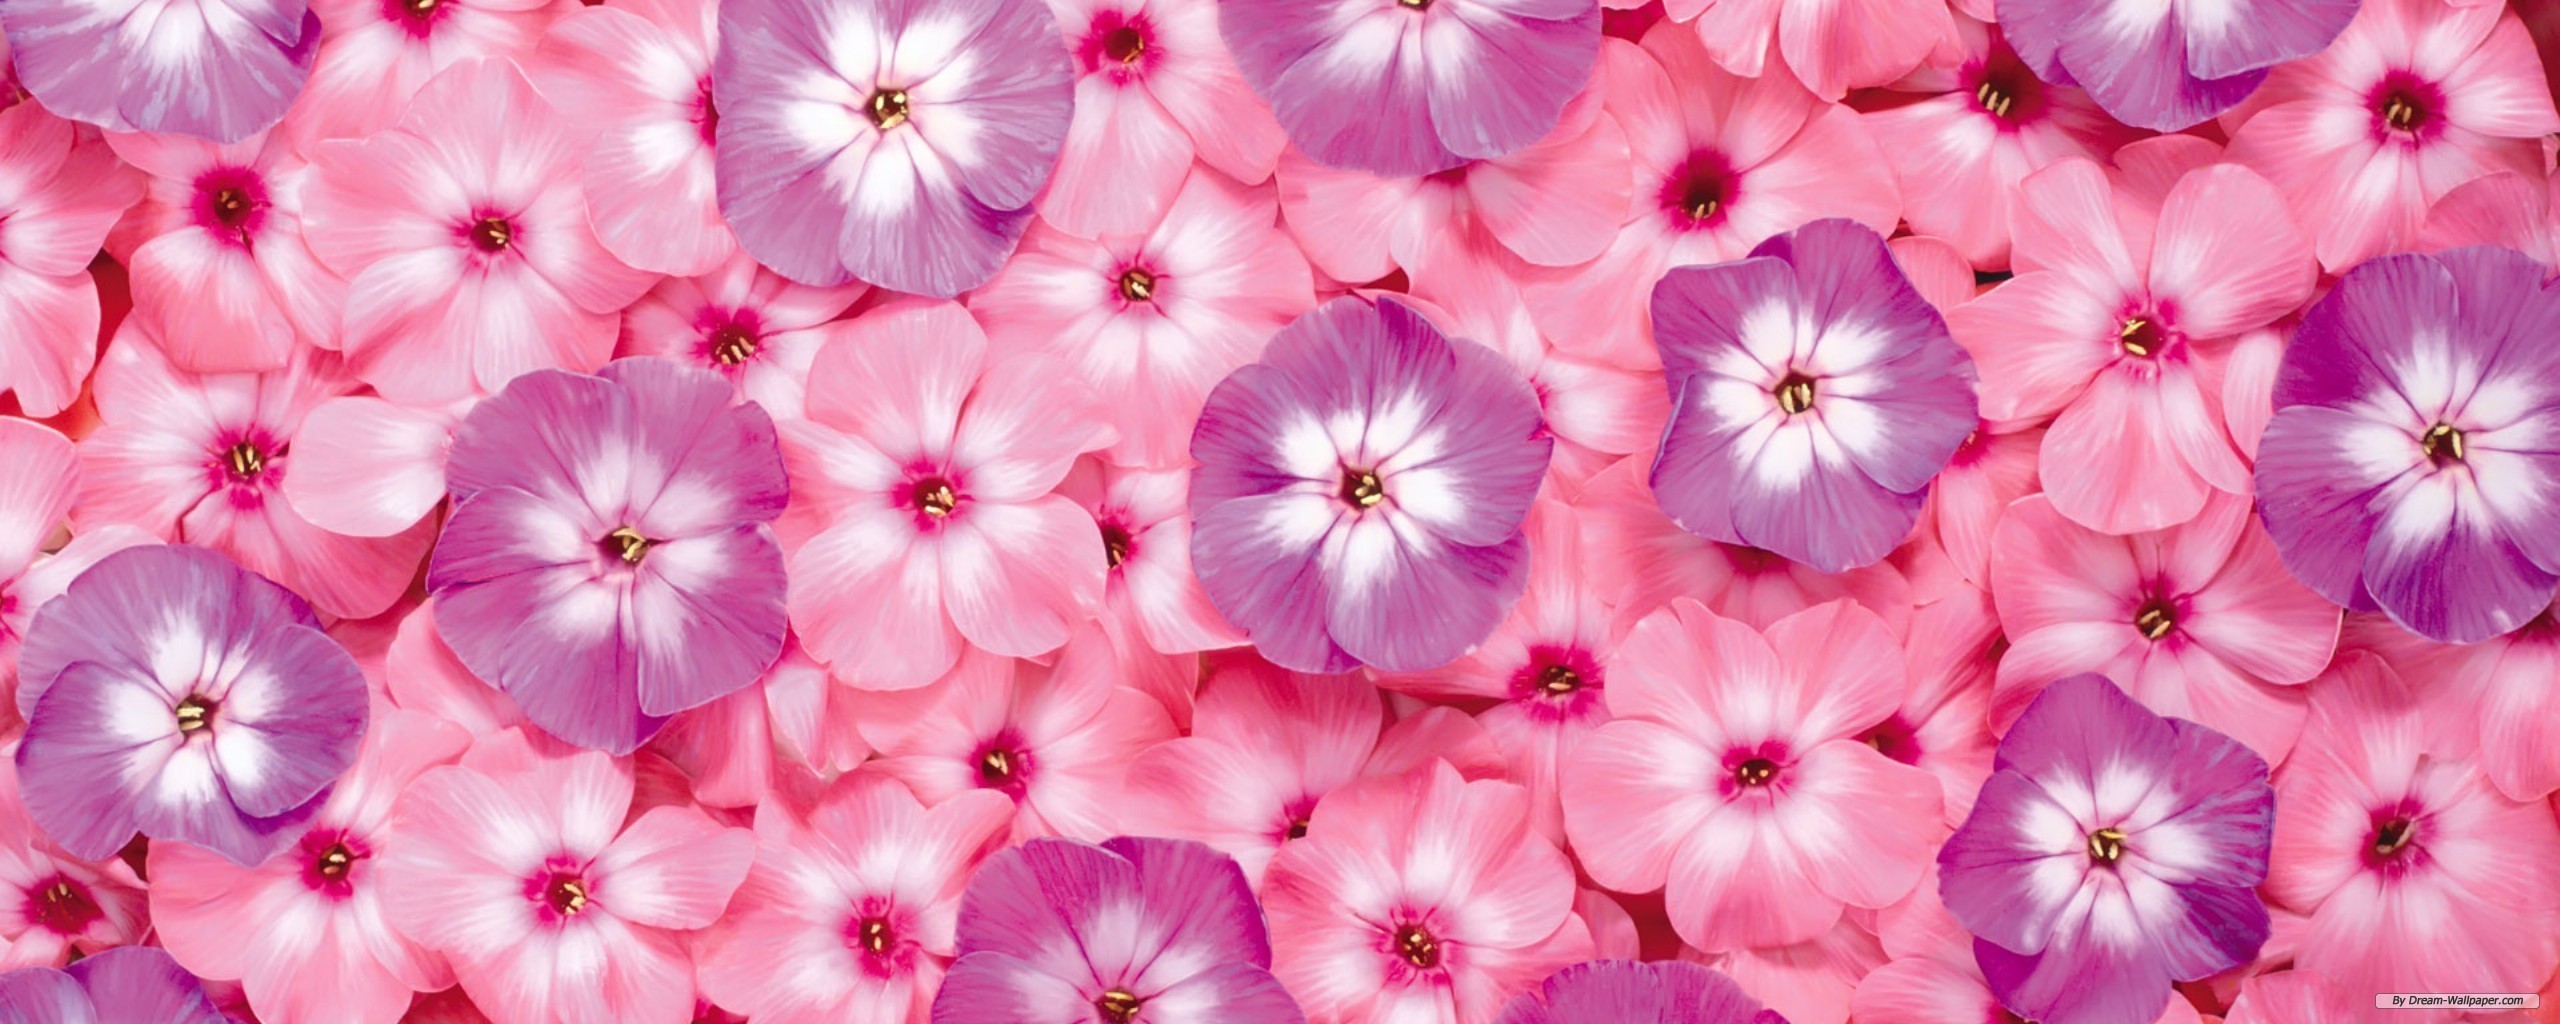 Facebook Cover Pink Flowers - 2560x1024 Wallpaper 